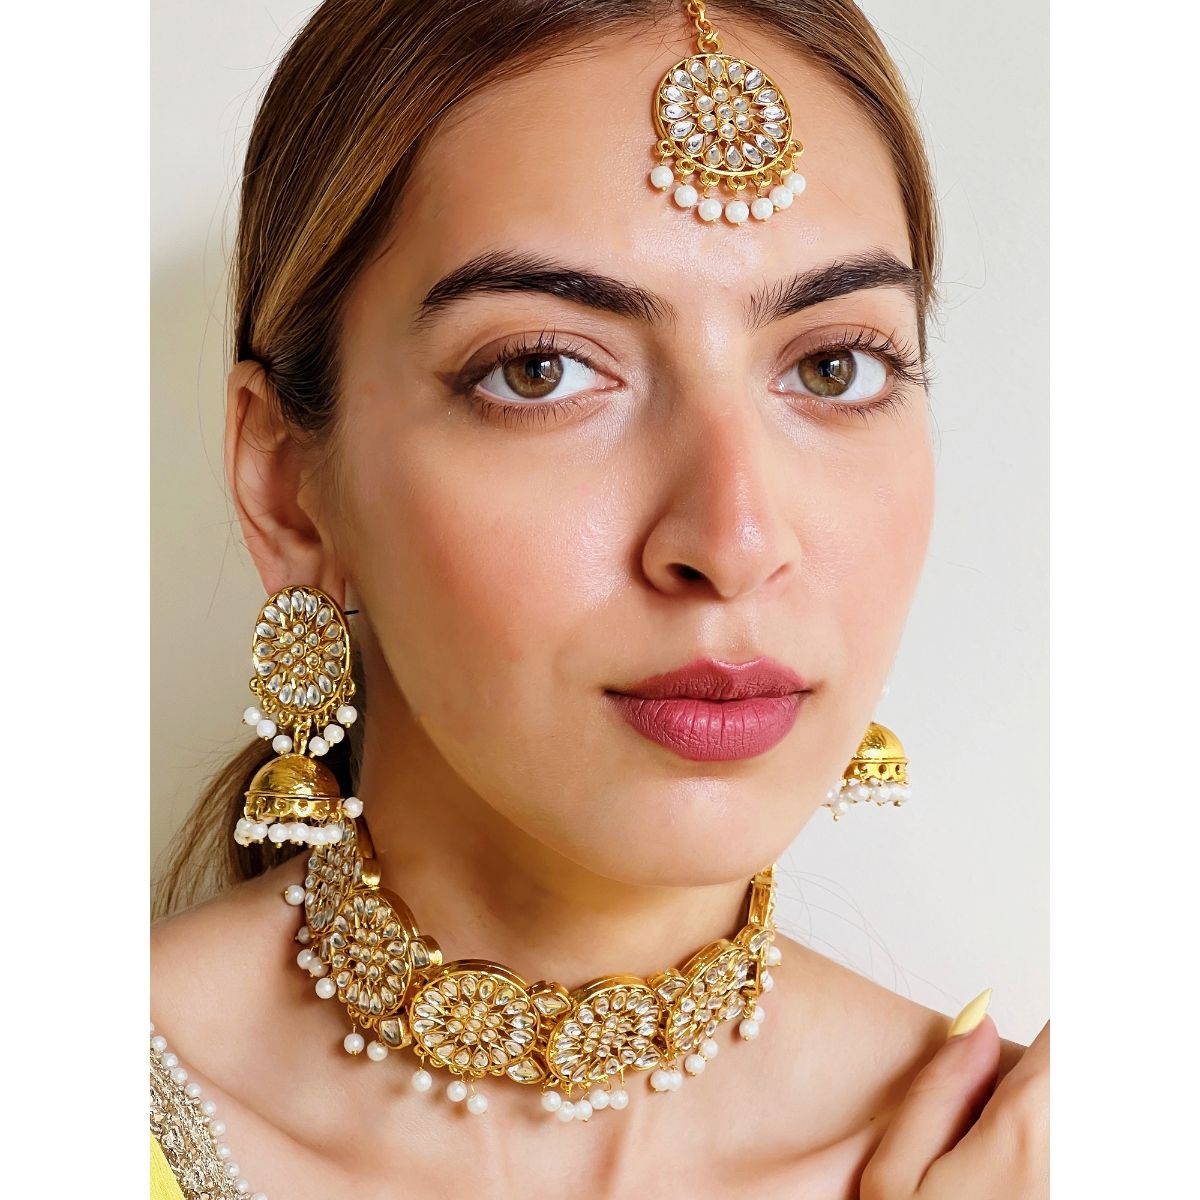 Buy Azai By Nykaa Fashion Stylish Gold Tone Festive Long Necklace  Earrings  For Women And Girls  Wedding Collection For Bride And Bridesmaid set at  Amazonin